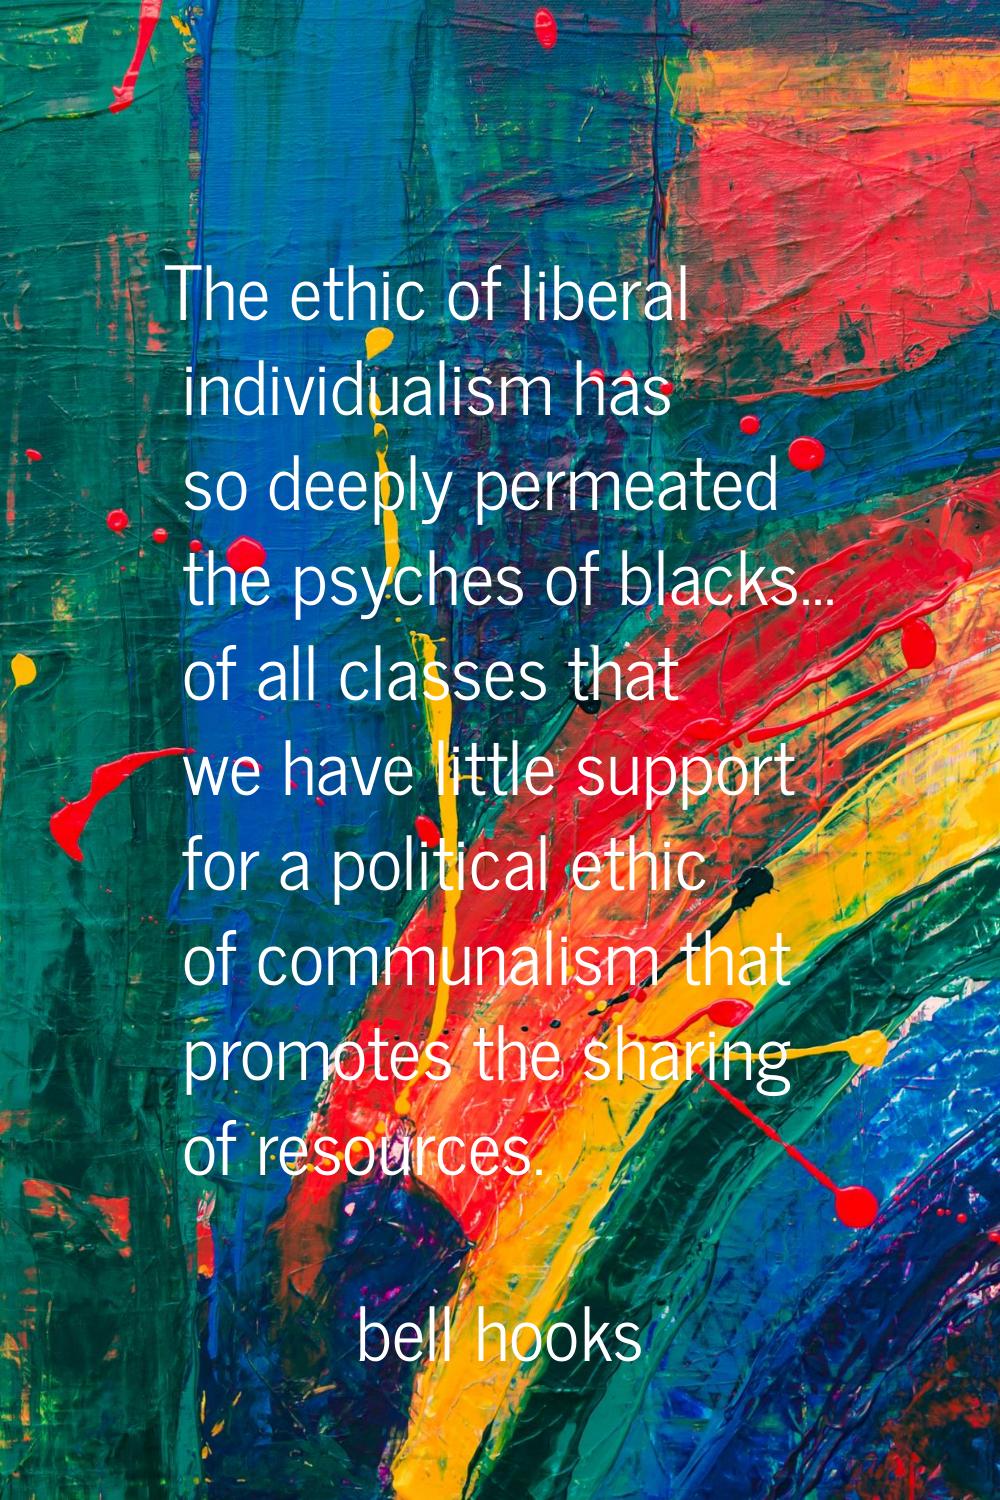 The ethic of liberal individualism has so deeply permeated the psyches of blacks... of all classes 